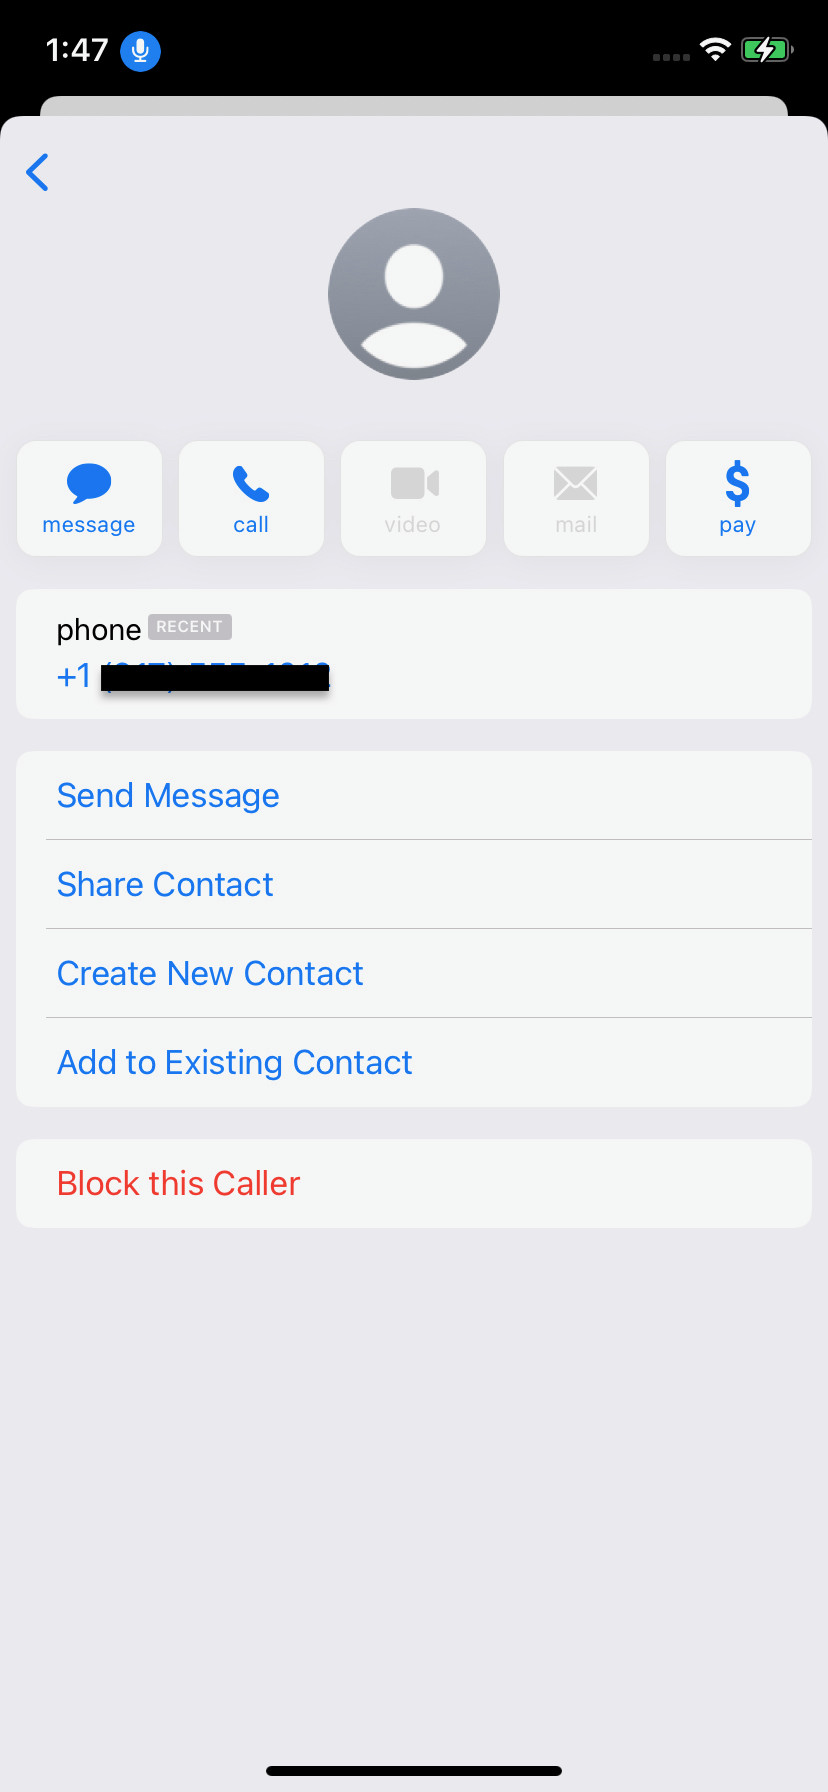 At the bottom of the page, select “Block this Caller.”